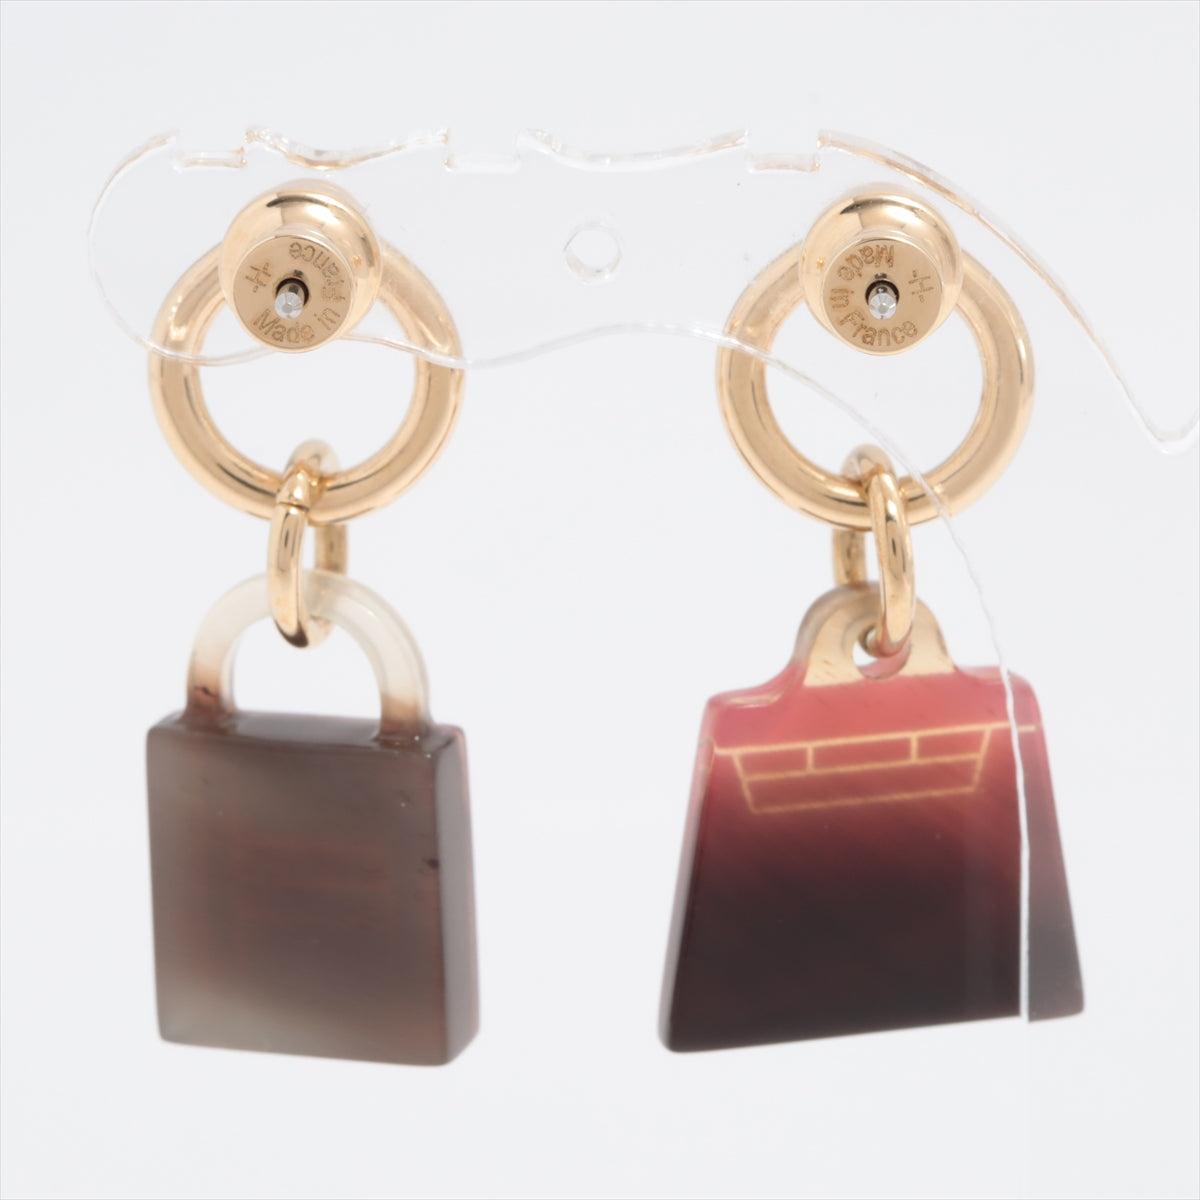 Hermès Amulet Marroquinier Piercing jewelry (for both ears) buffalo Horn Gold